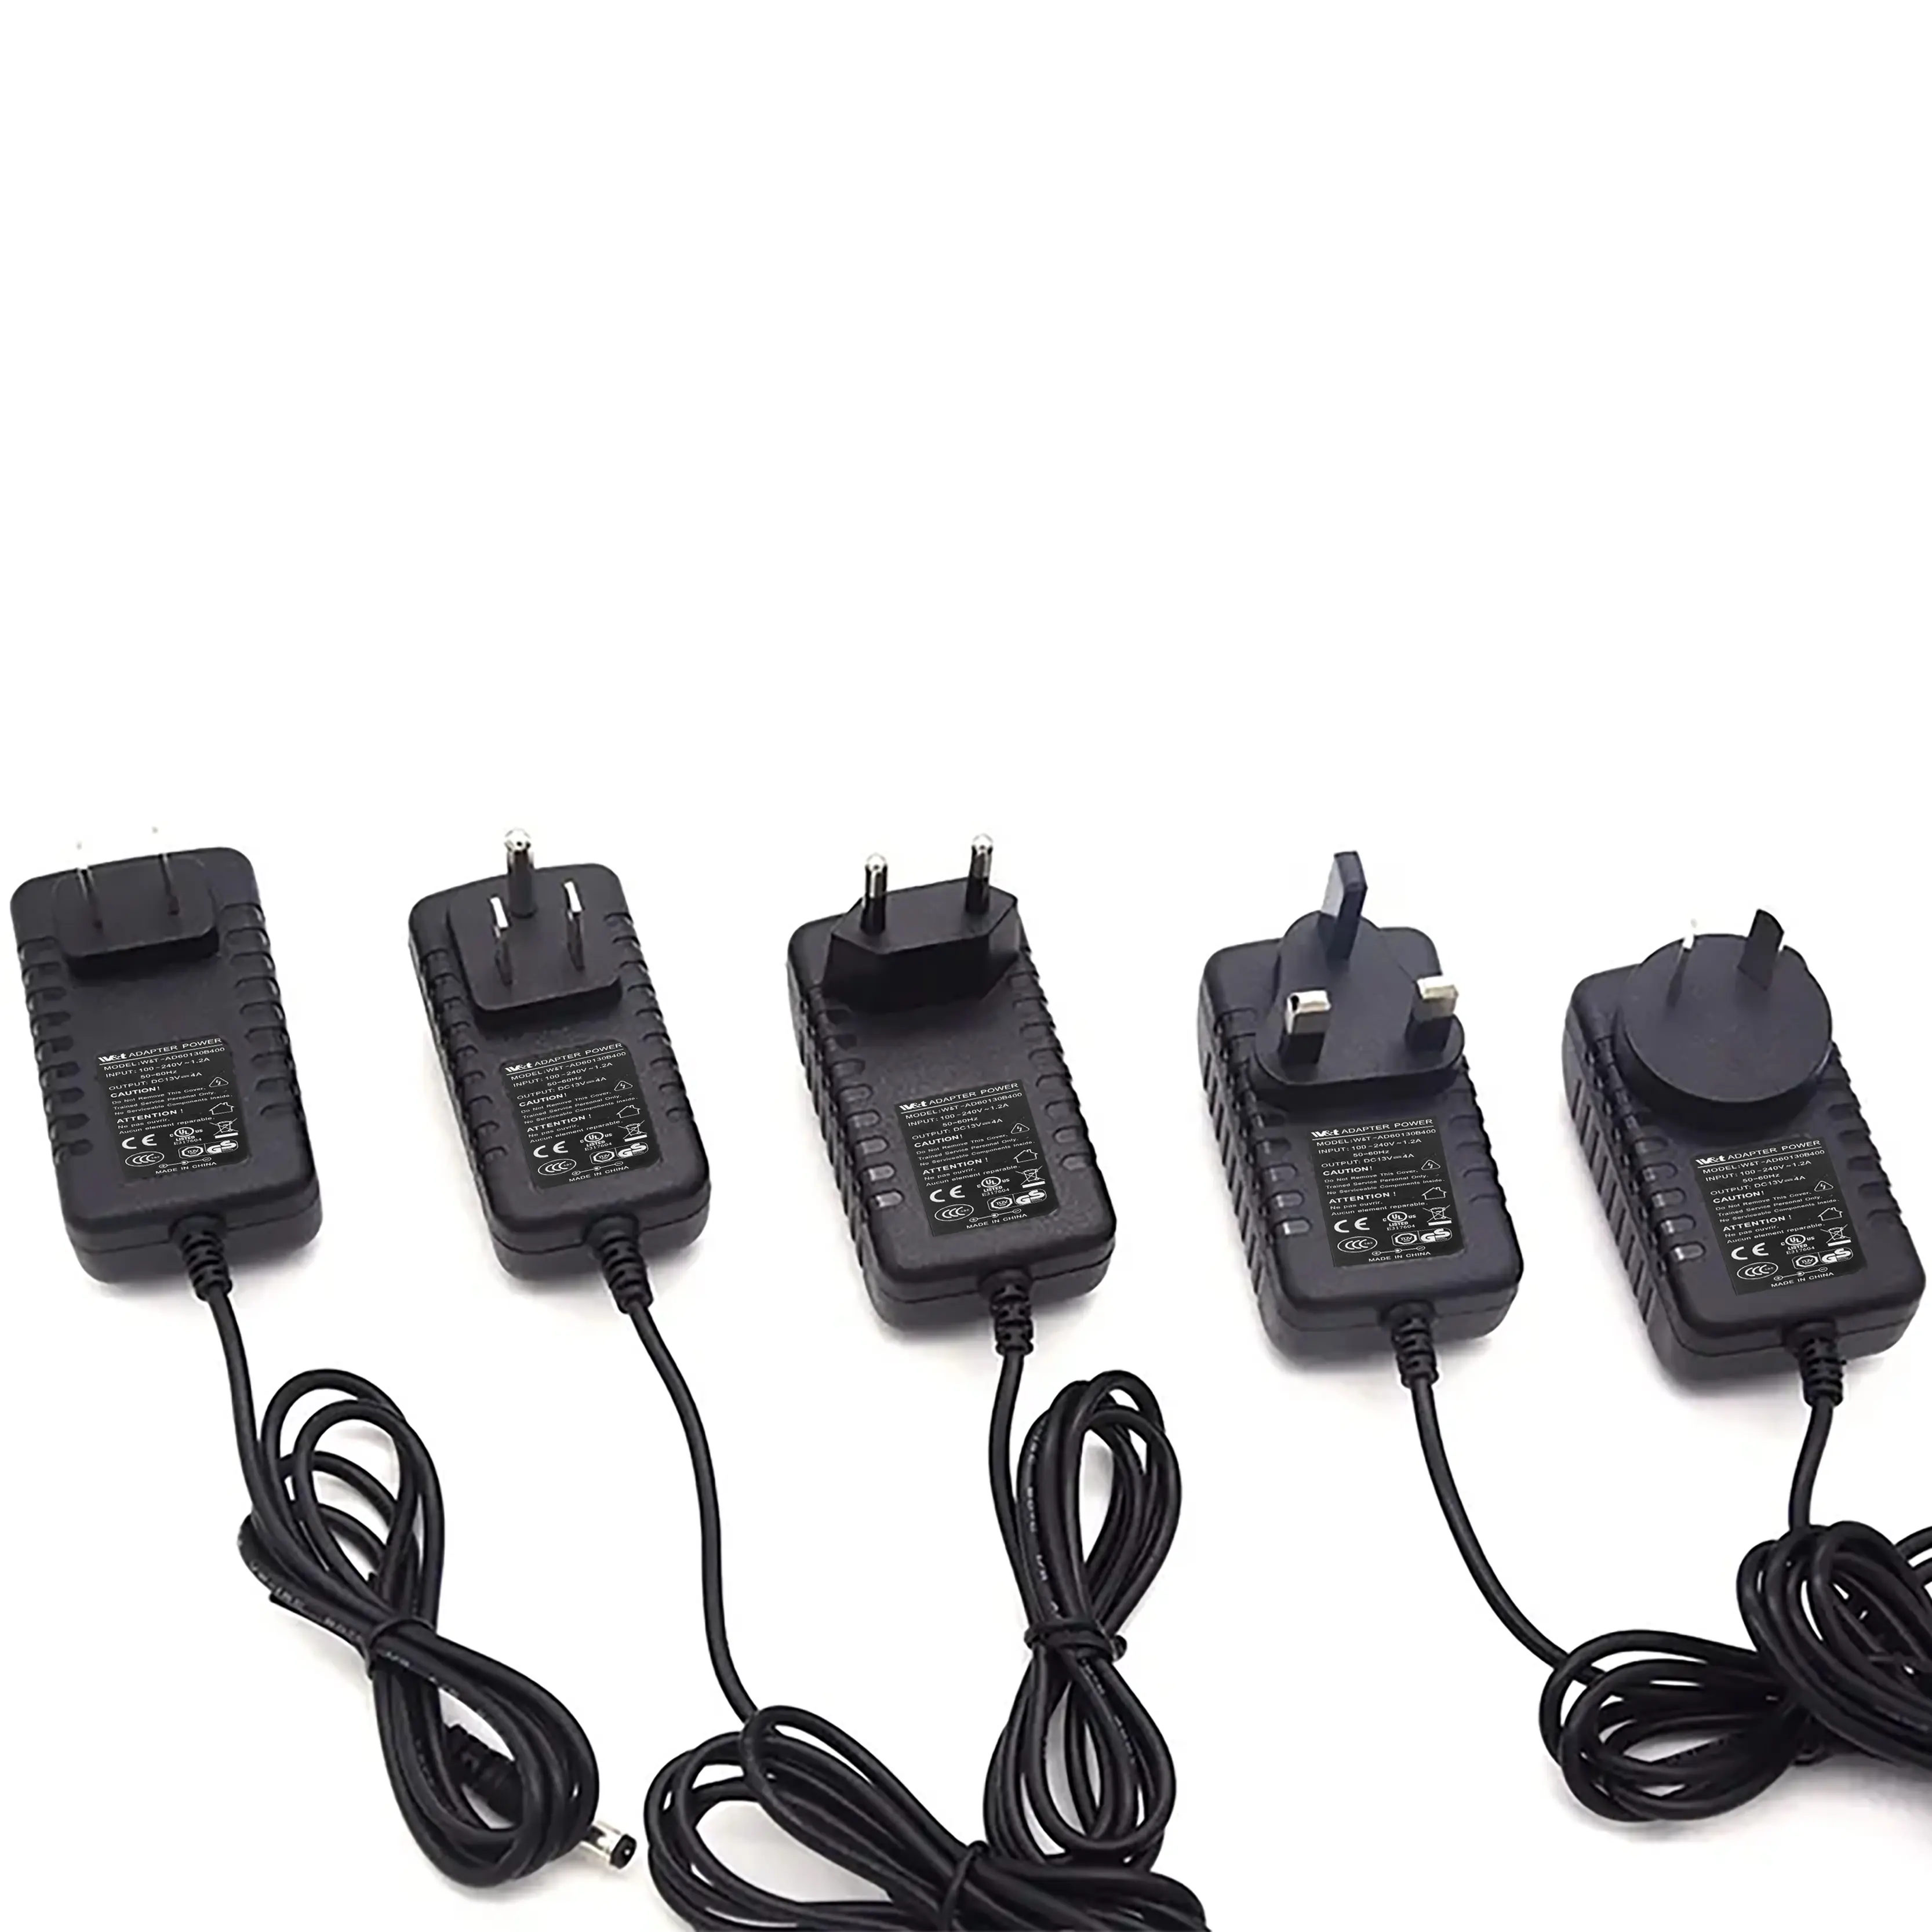 Dc Power 5v 3a 12v 2a Adapters power 24 pin to 18pin power supply adapter ac dc adapter